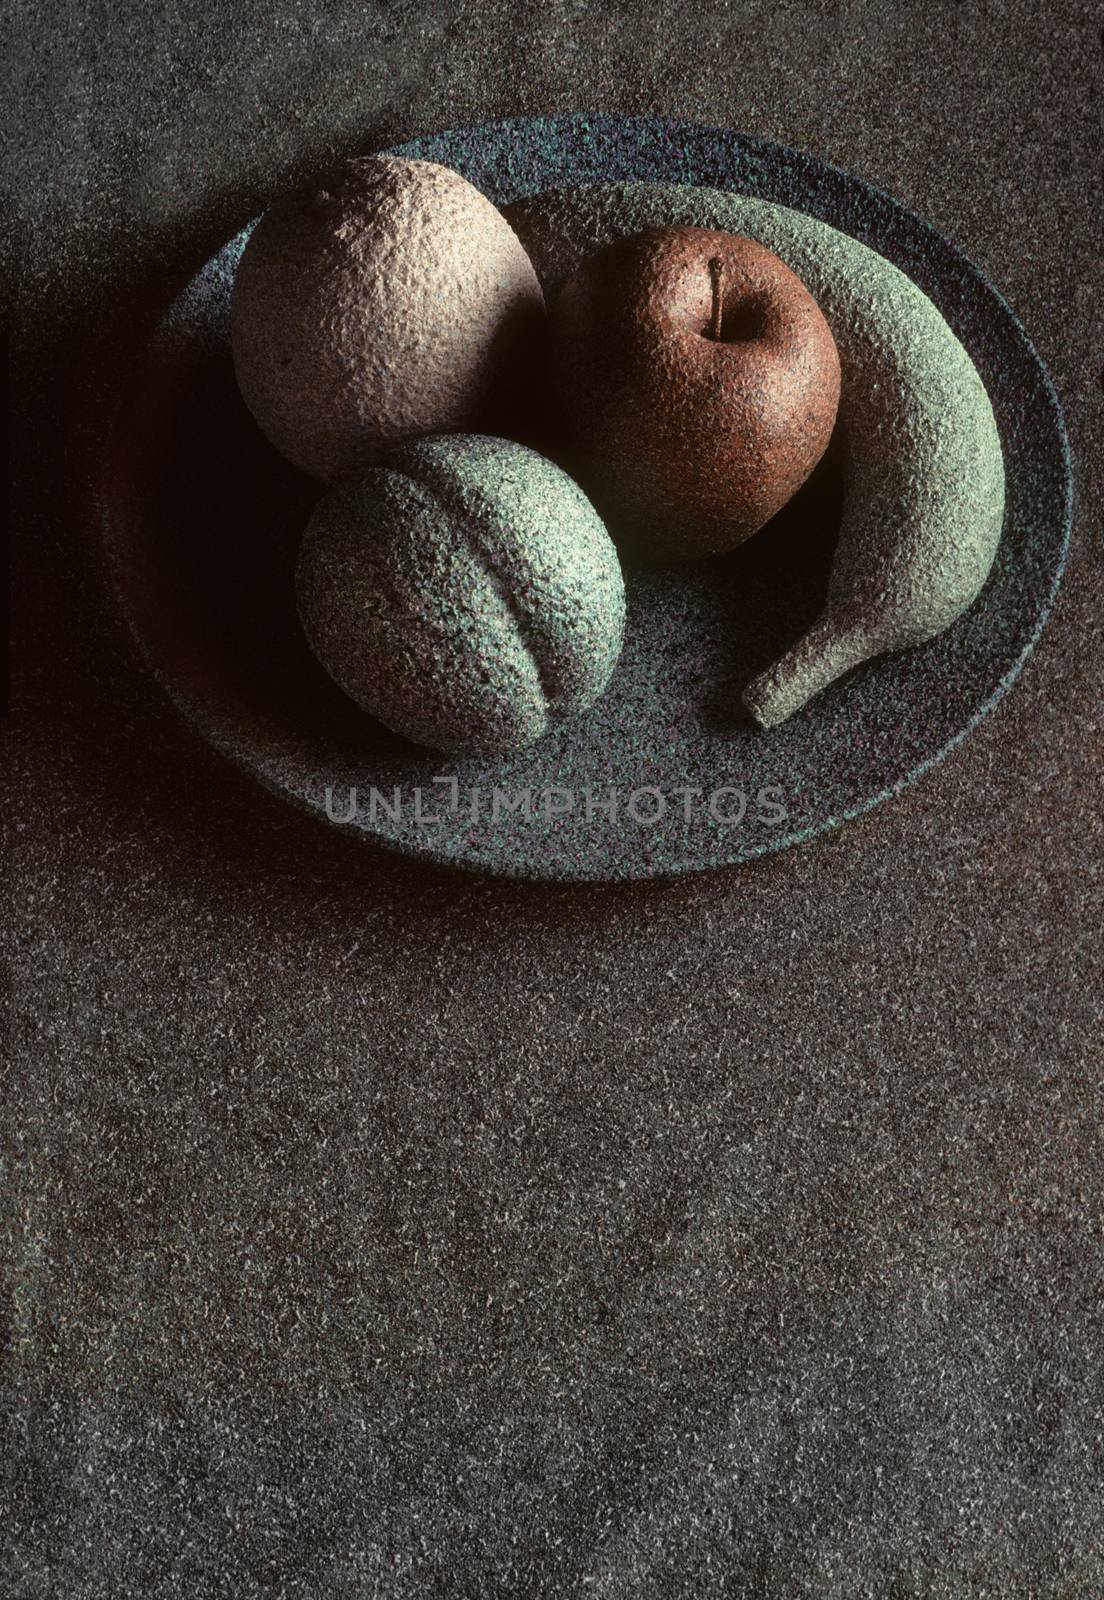 Granite-like sculpture of fruit on a plate by Balefire9